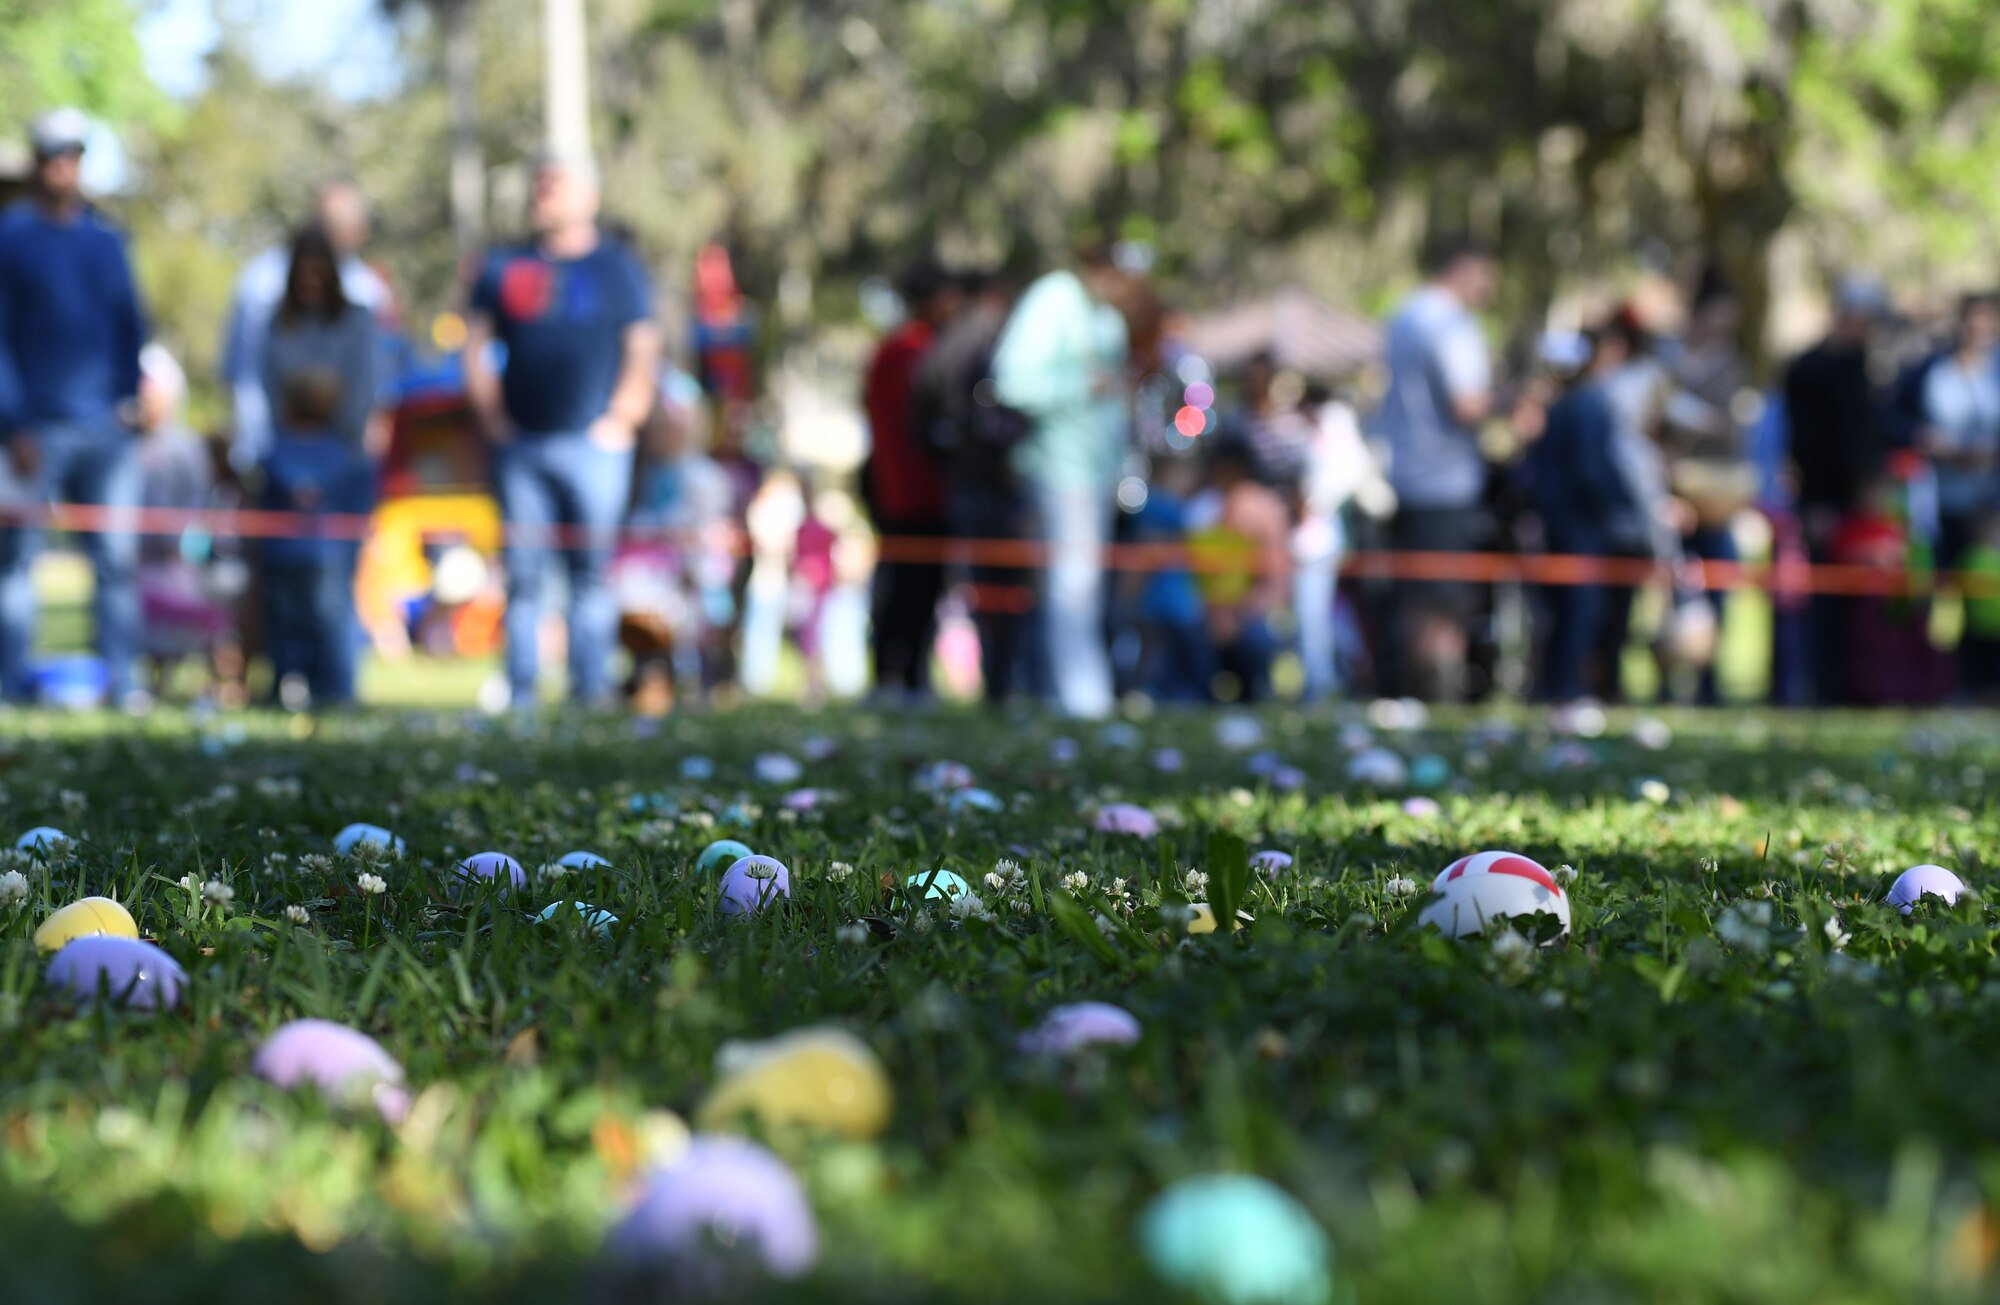 Plastic Easter eggs lay in the grass during Keesler's Eggstravaganza at the marina park at Keesler Air Force Base, Mississippi, April 9, 2022. The 81st Force Support Squadron hosted the event for military children. (U.S. Air Force photo by Kemberly Groue)